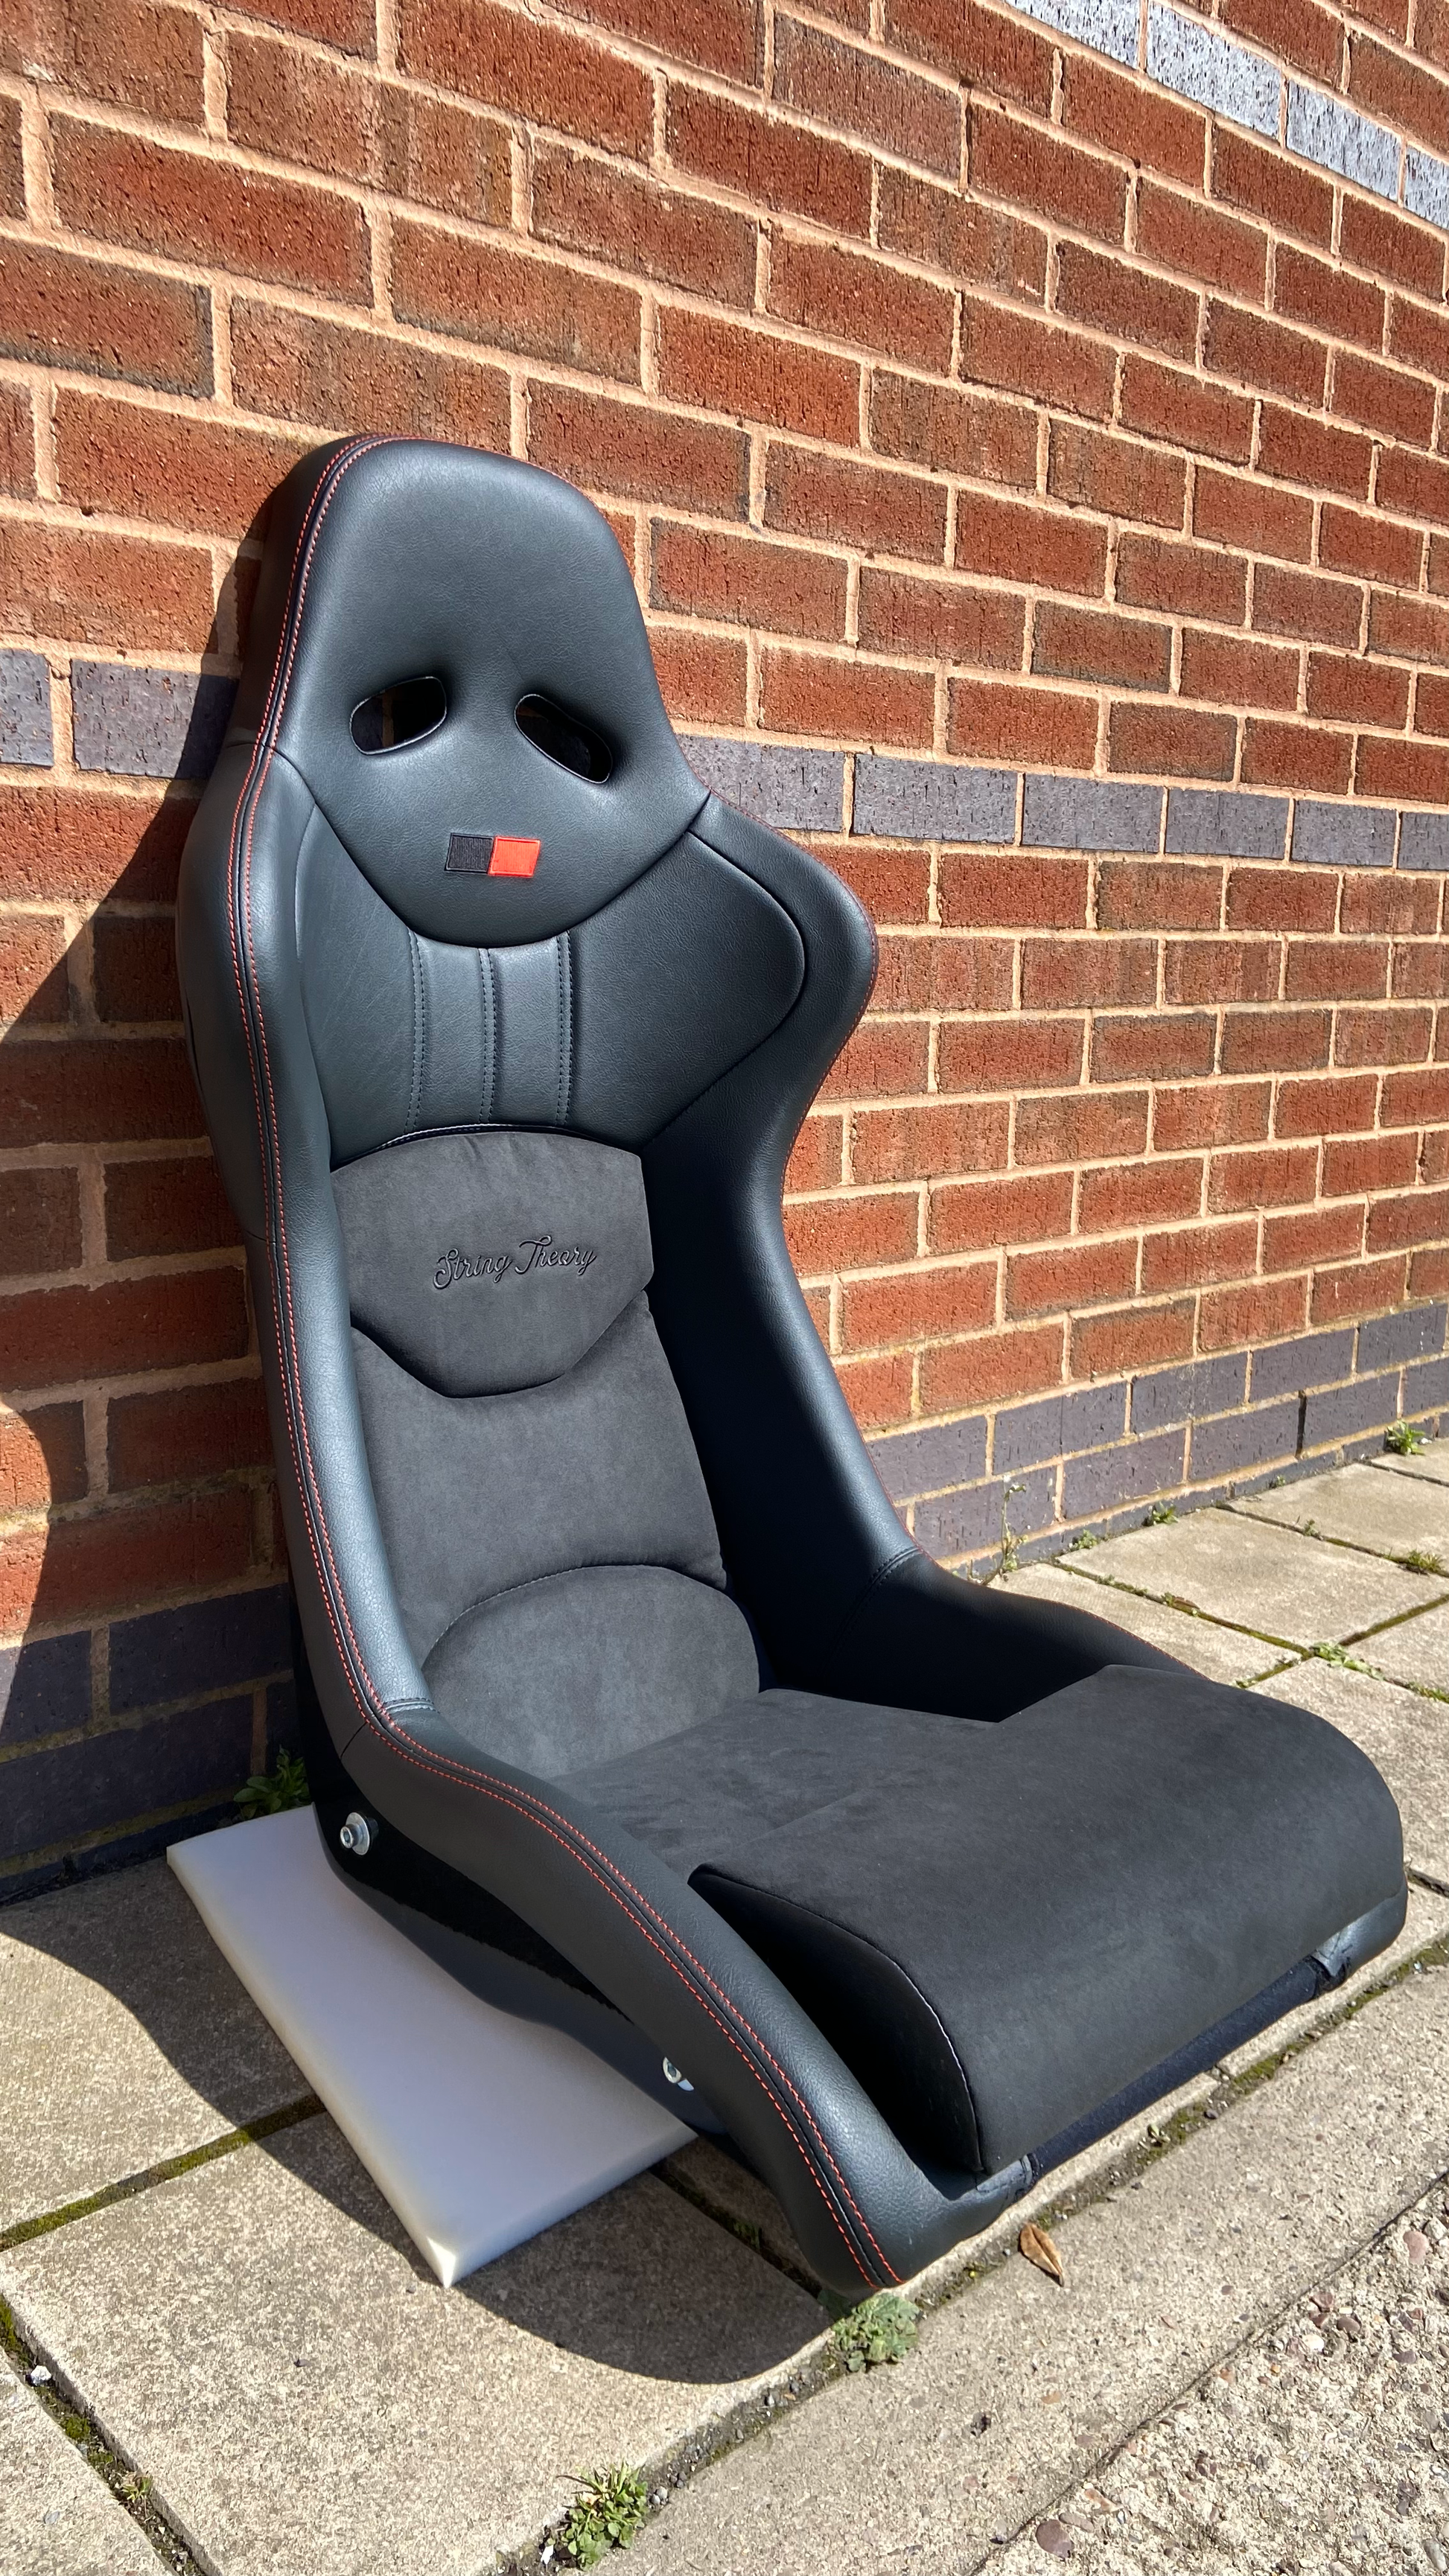 Offside front view of a black Cobra Nogaro Circuit sports seat with red stitching, red / black emblem on the headrest & a String Theory logo sewn into the back rest